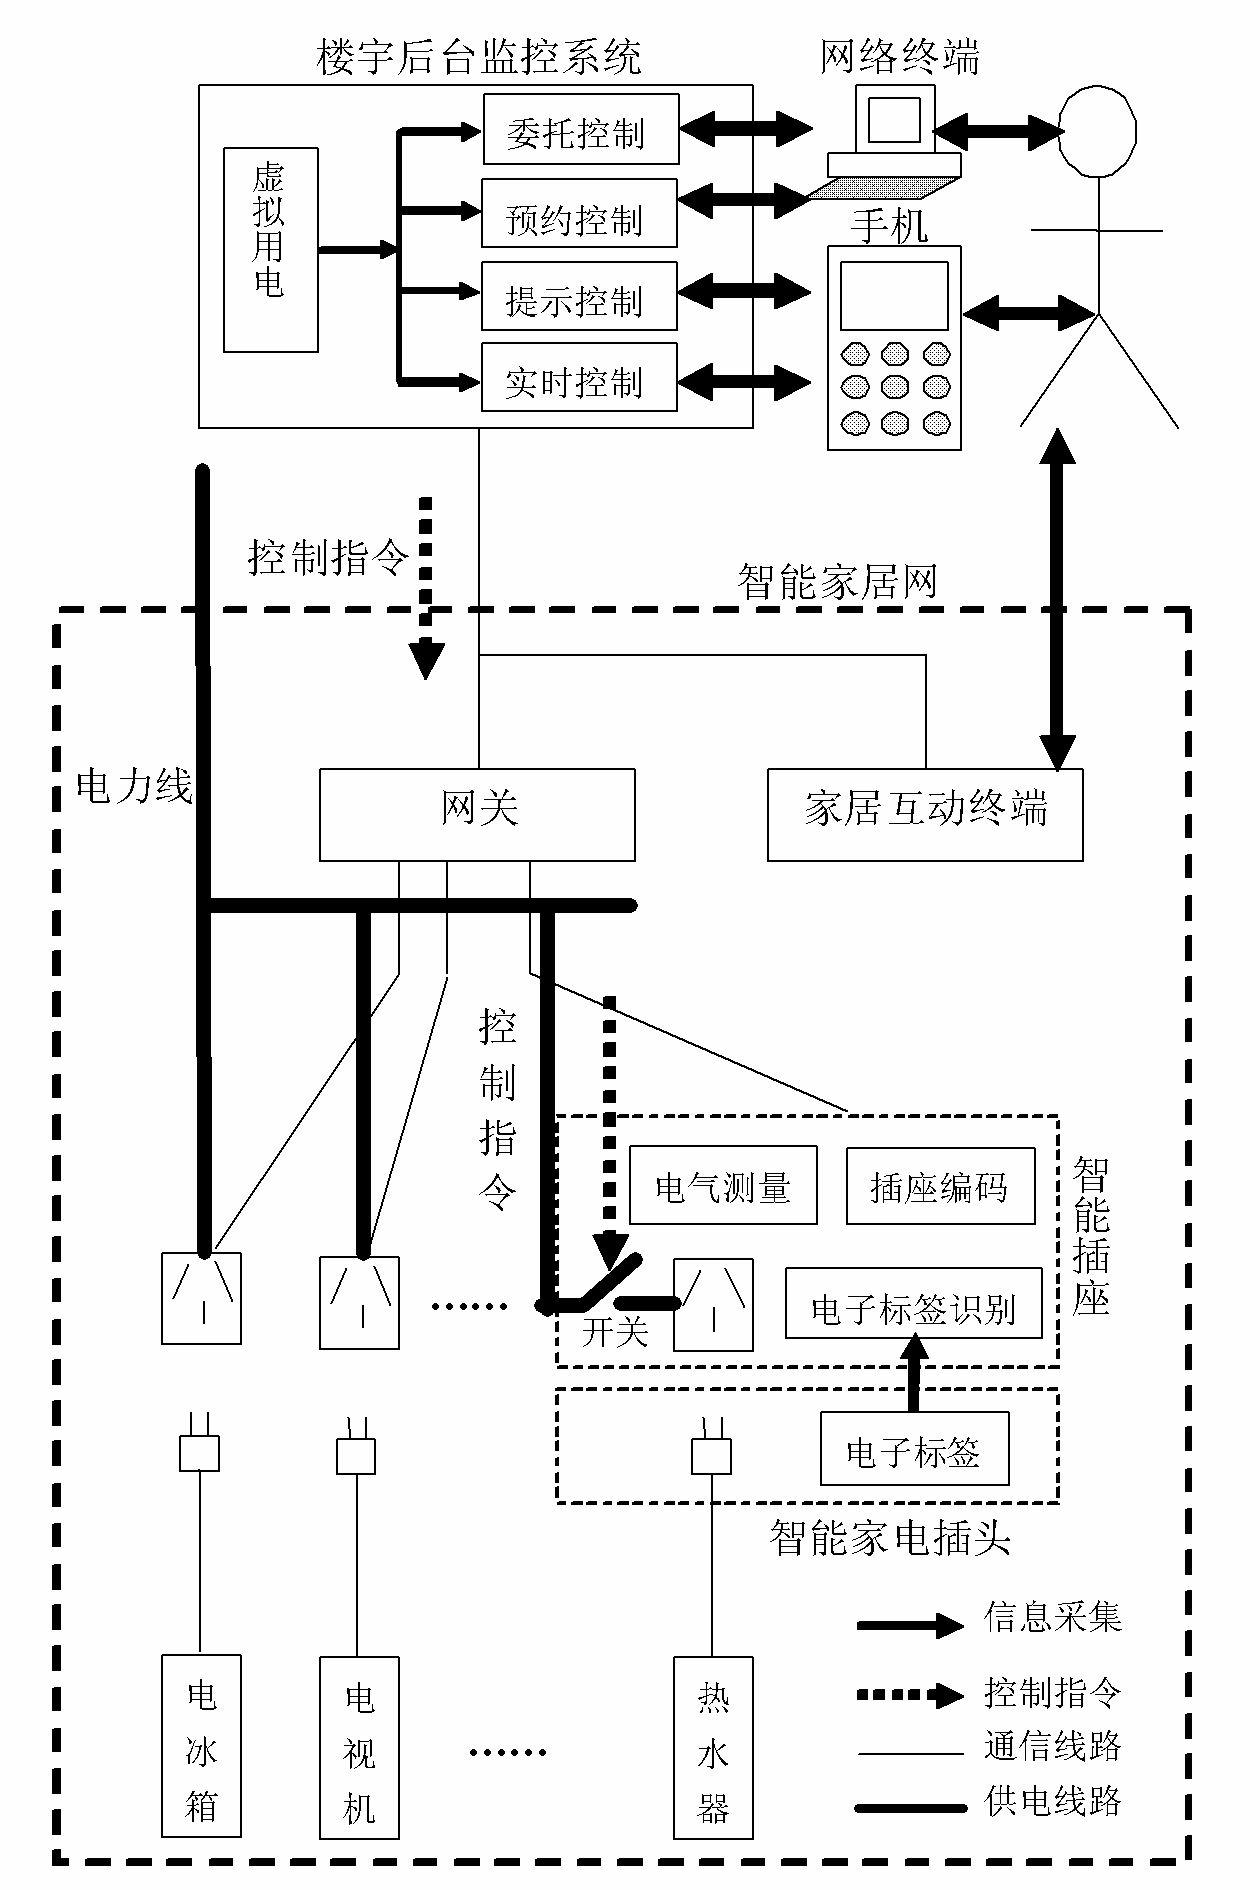 Networked intelligent household electricity optimizing control method